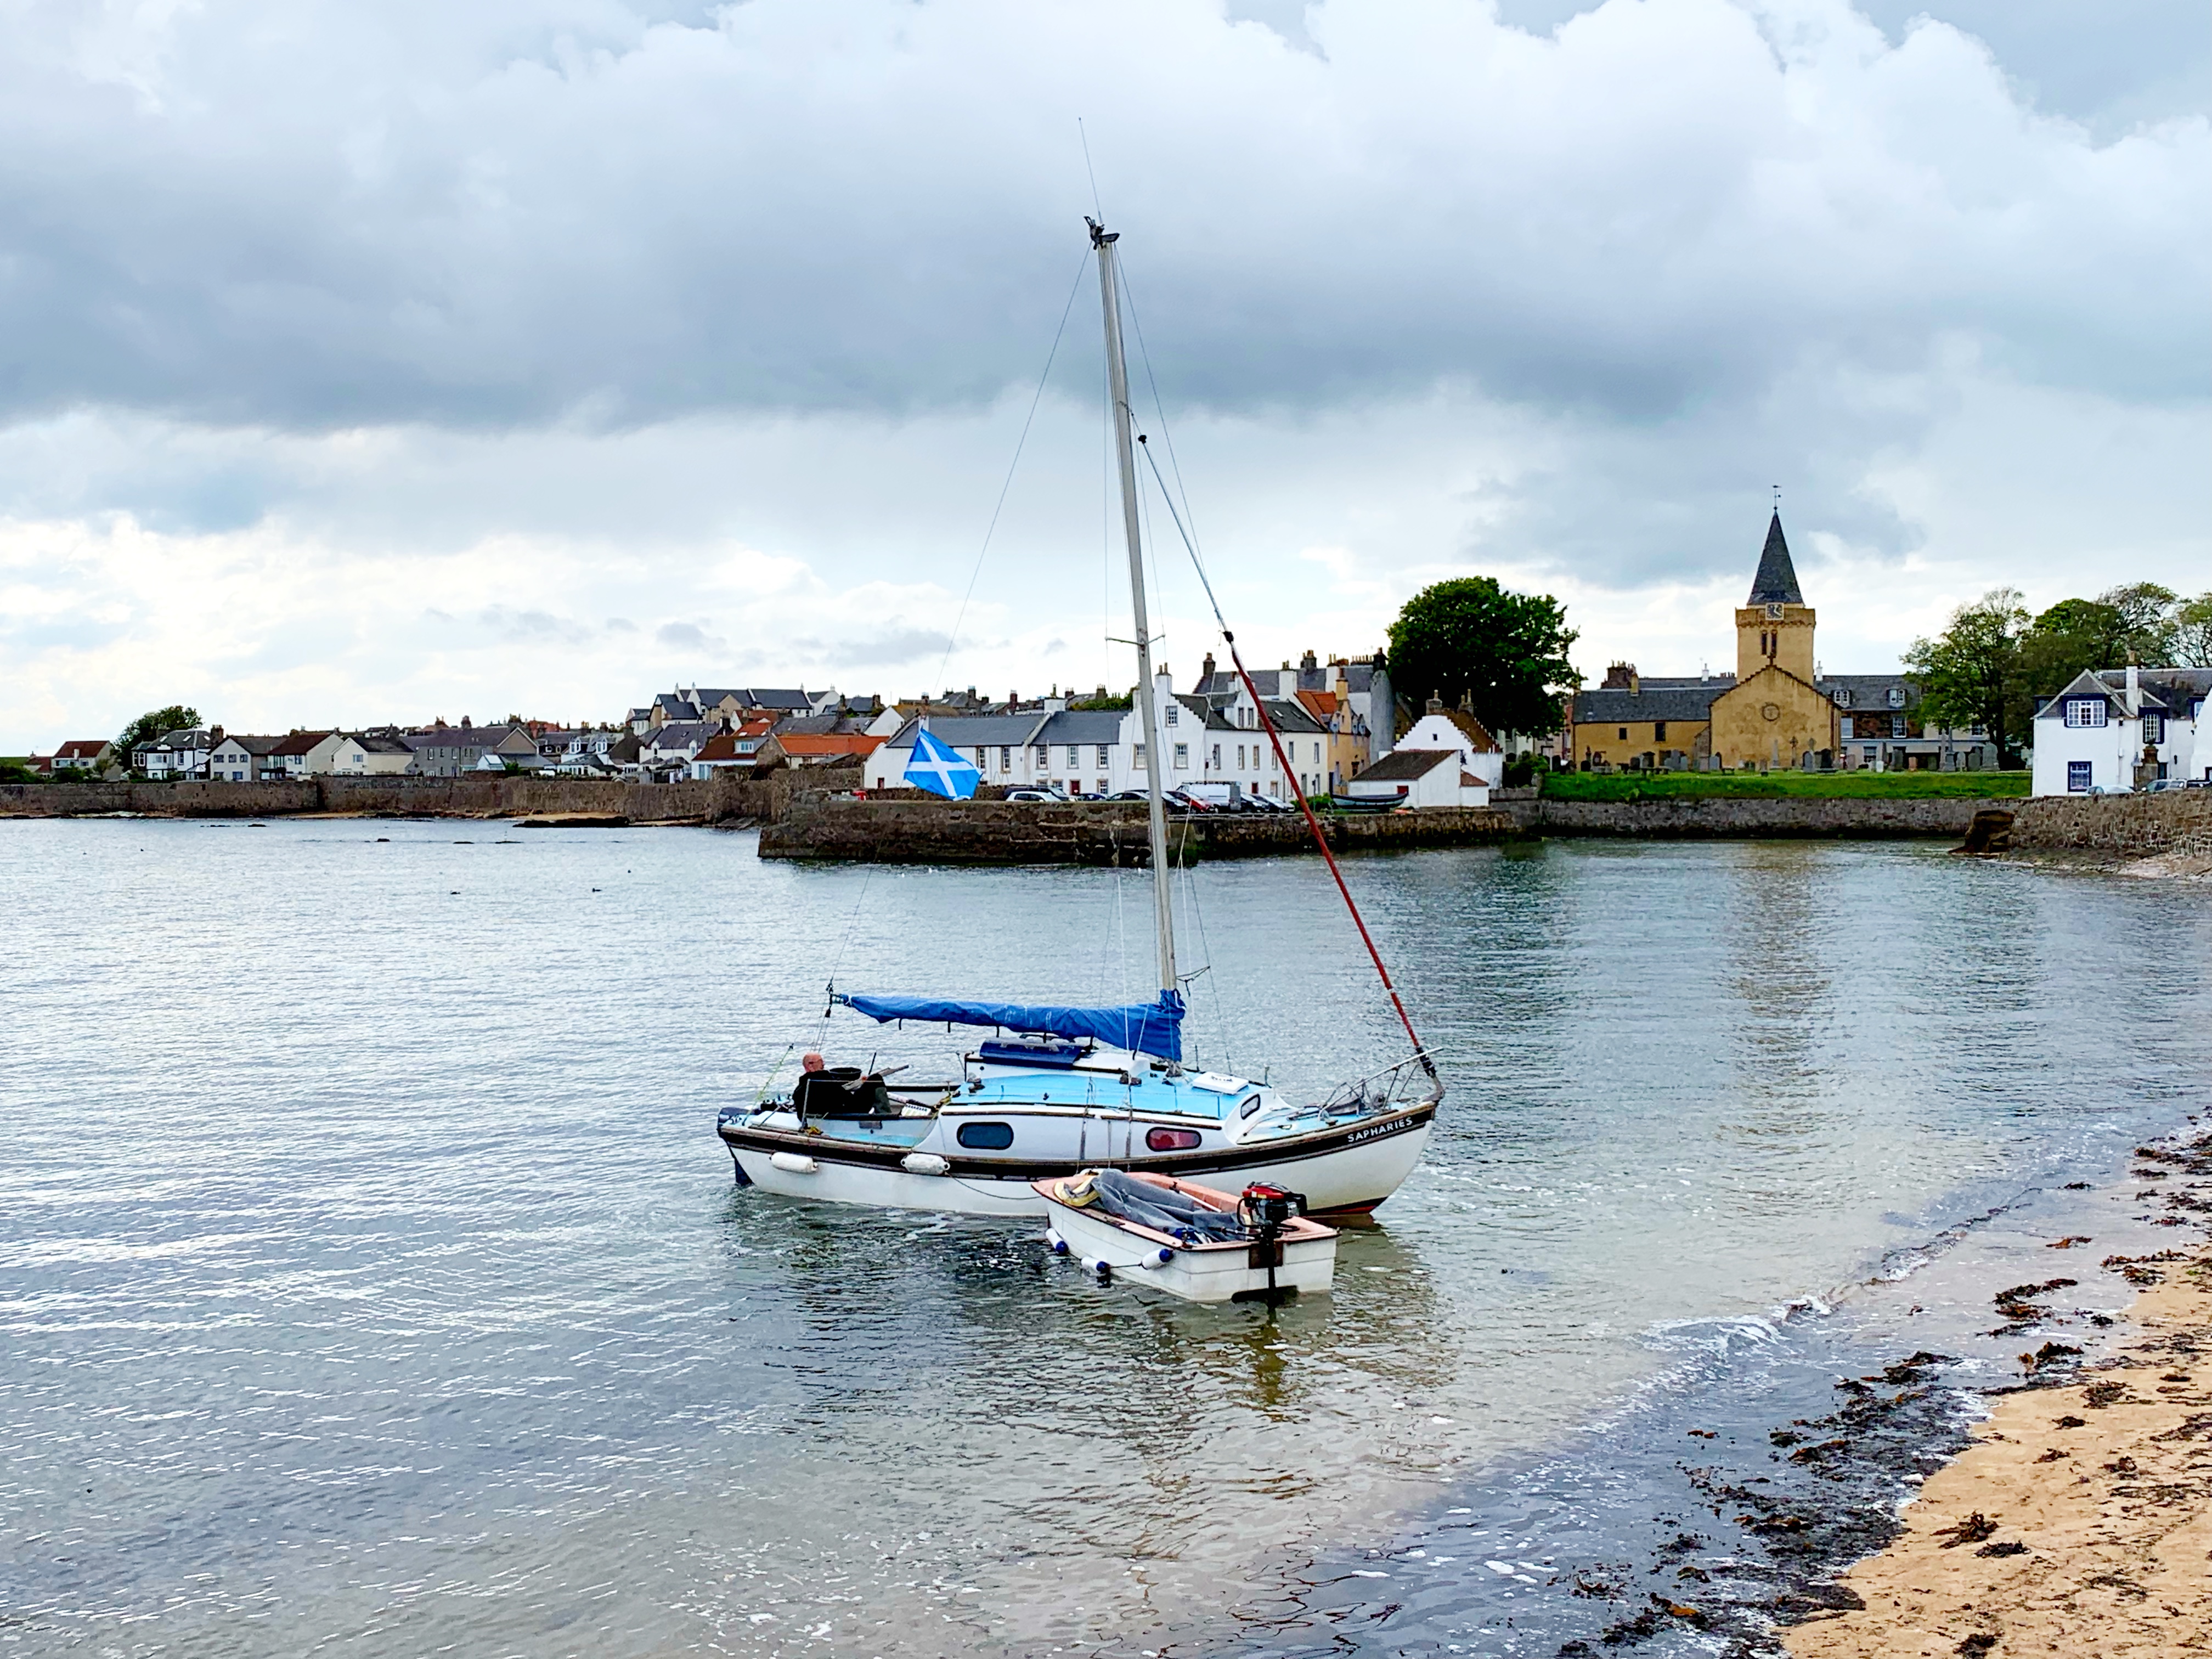 Small sailboat in Anstruther, Fife Scotland